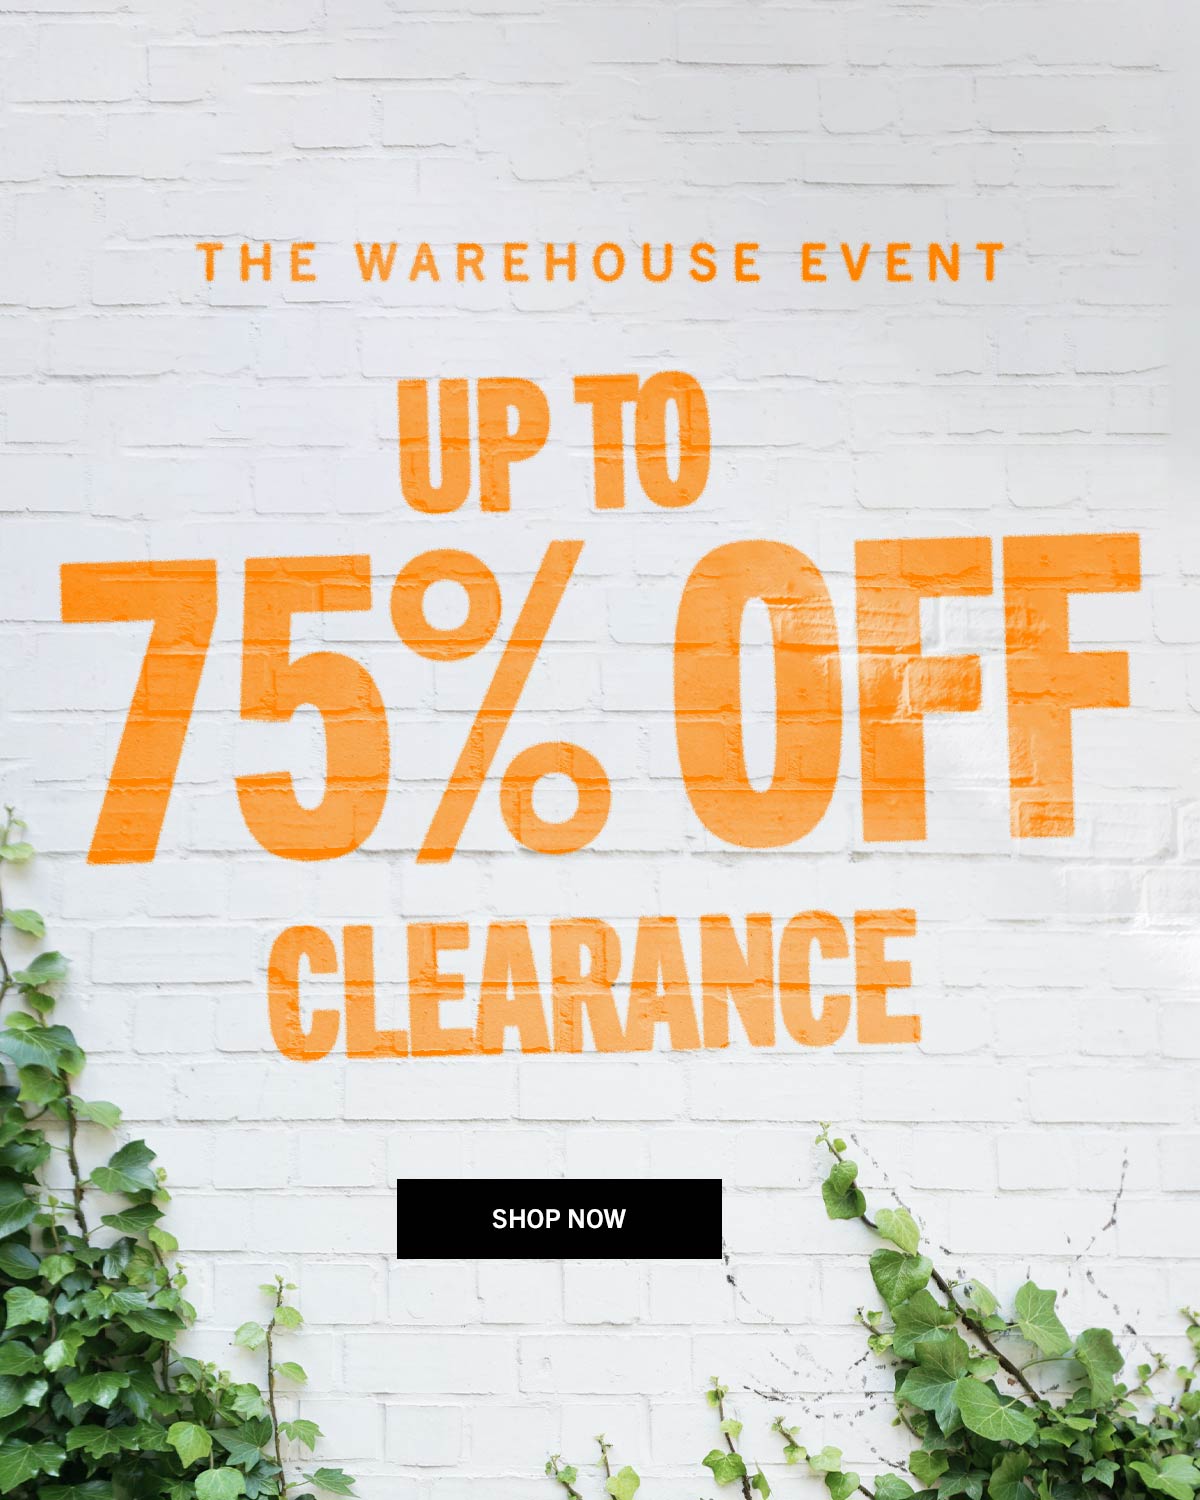 The Warehouse Event. Up to 75% Off Clearance. Shop Now.